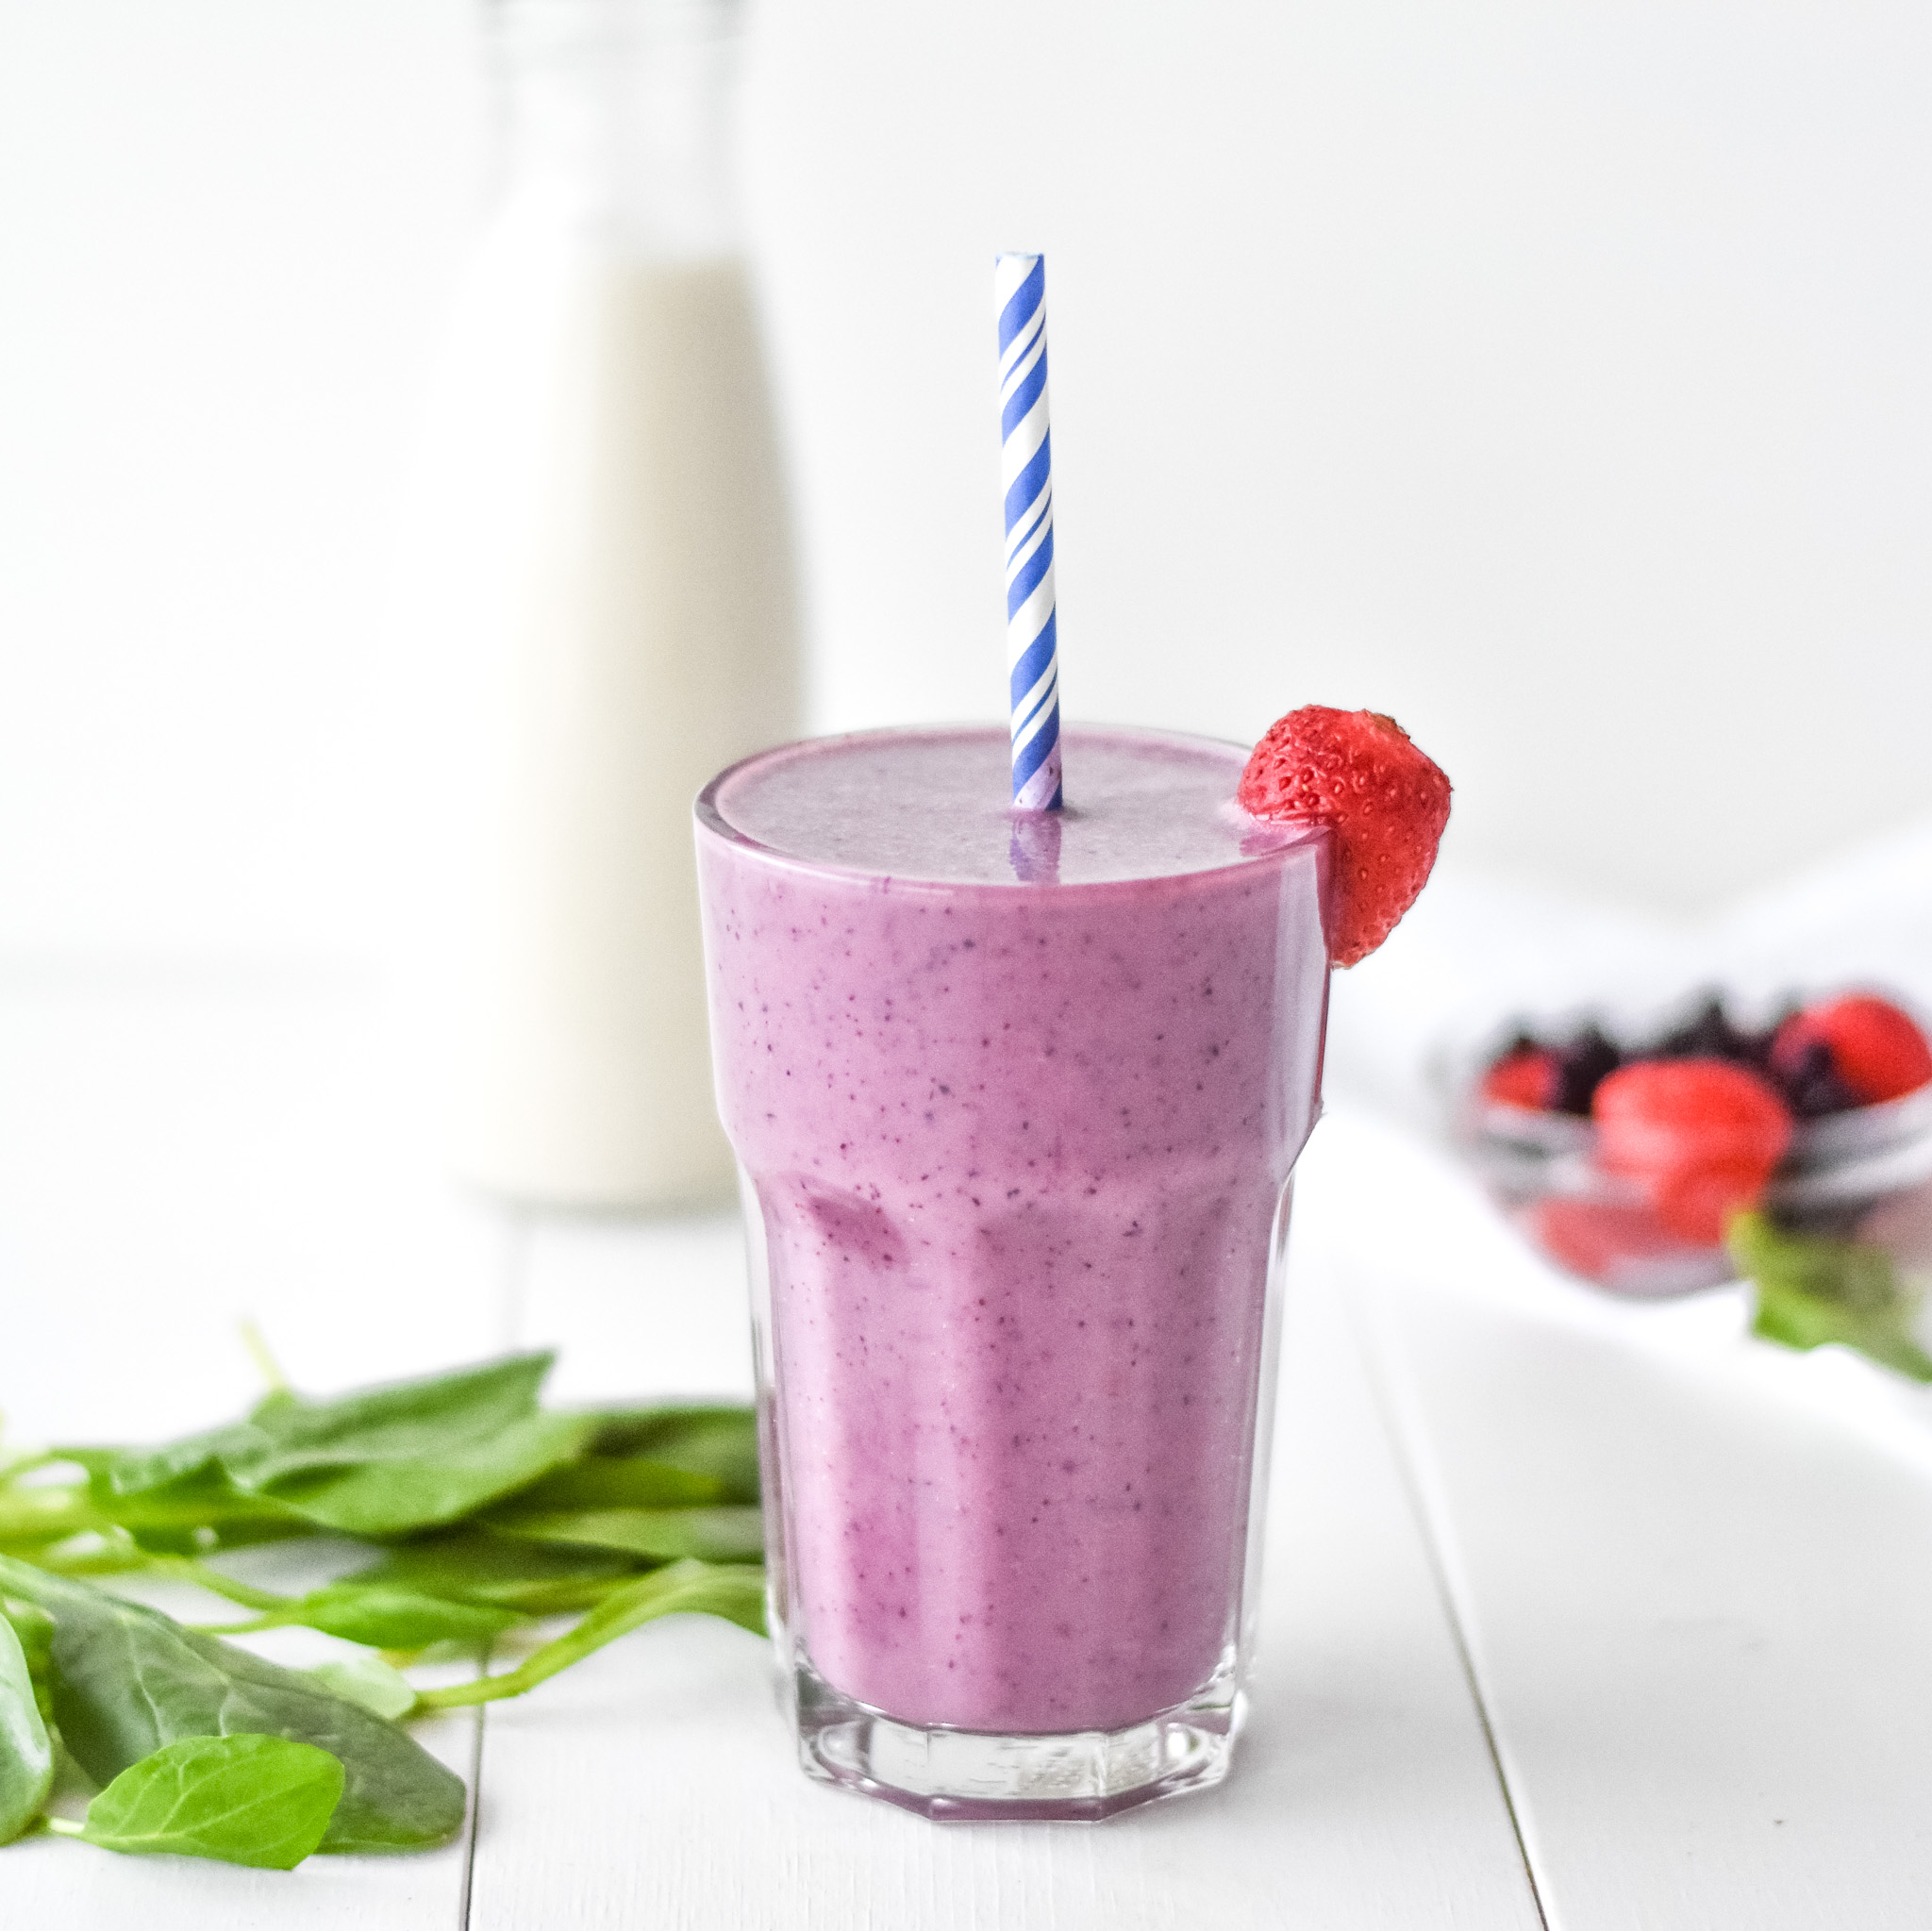 berry spinach smoothie